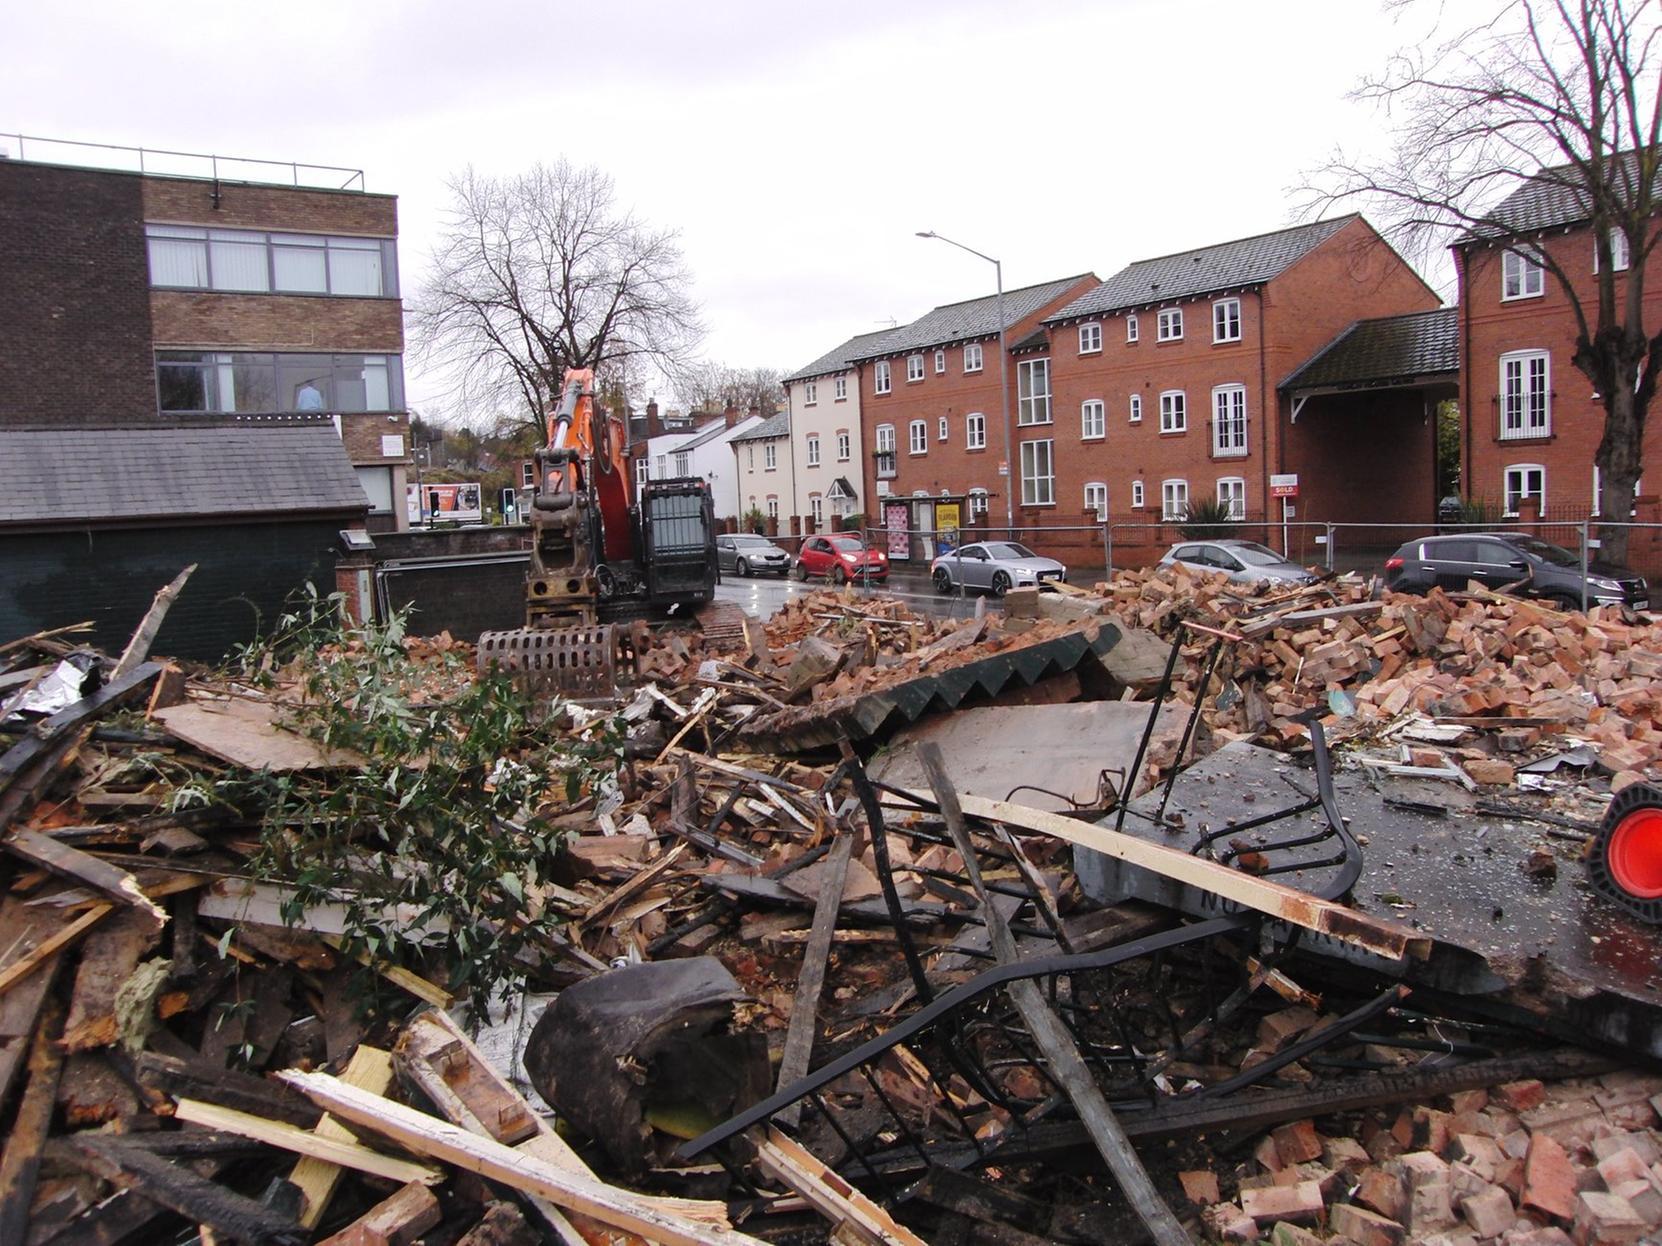 In November, the remains of the Great Western pub in Warwick finally came down. What is now a site of rubble once stood a beautiful Victorian building, now lost forever. The building caught fire in 2018 and was demolished to make way for houses.